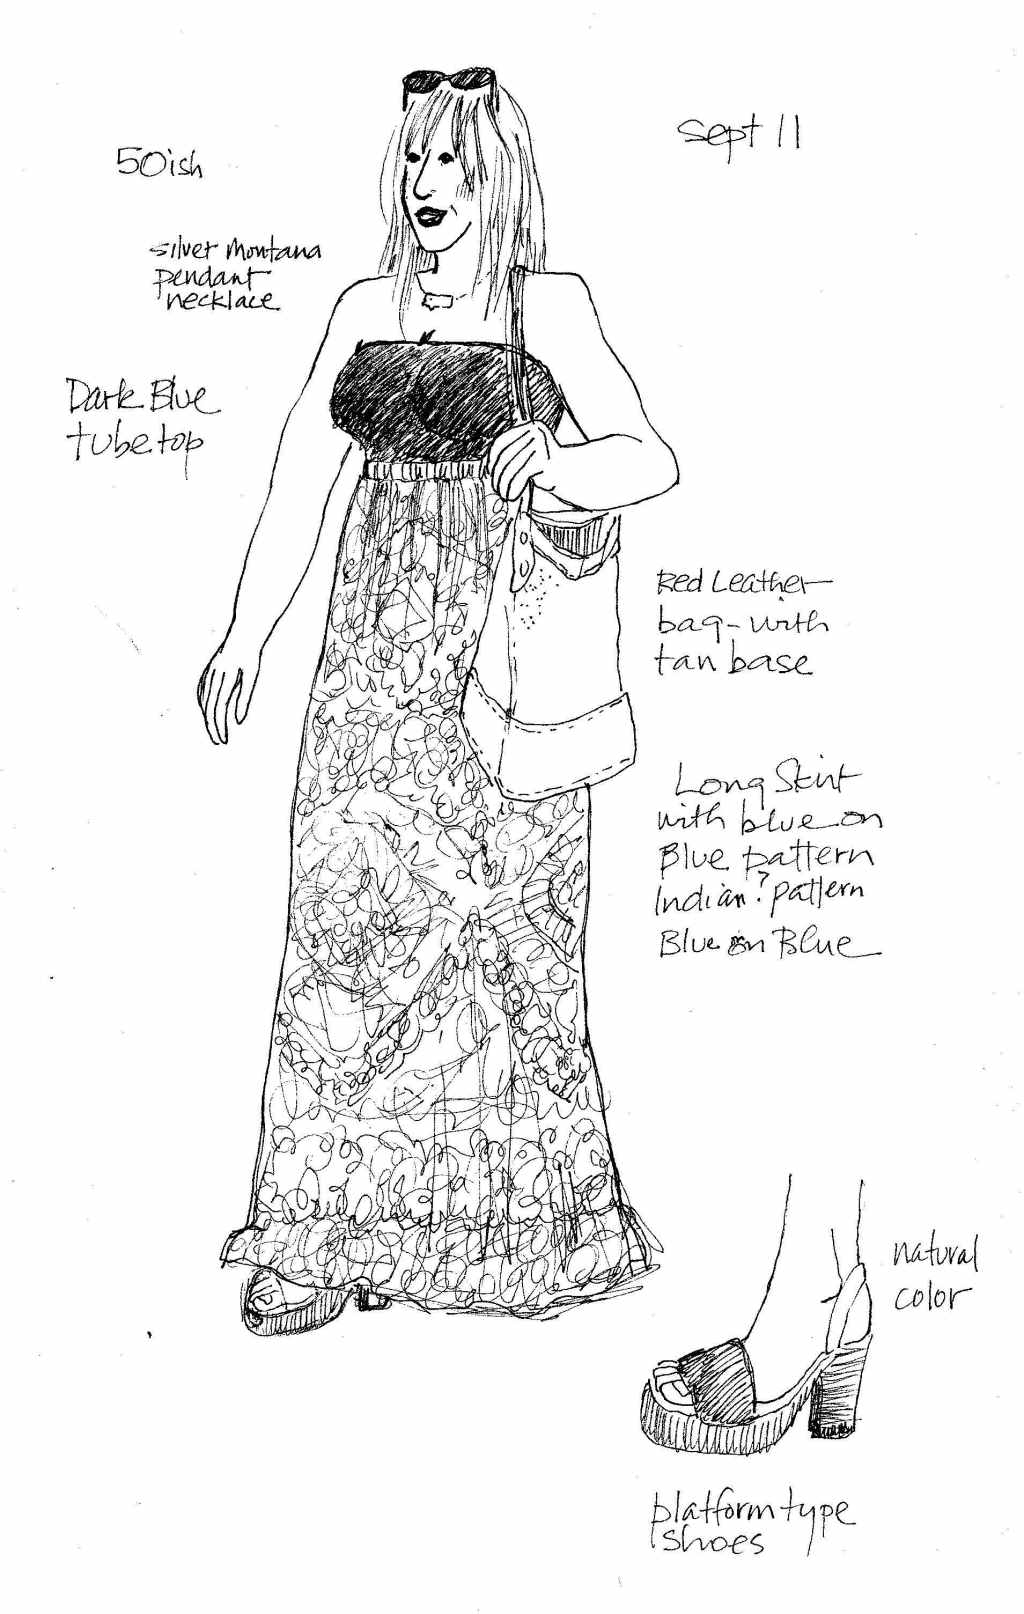 New Sketches in The Whitefish Fashion Collection by Nanci Williams at The Purple Pomegranate